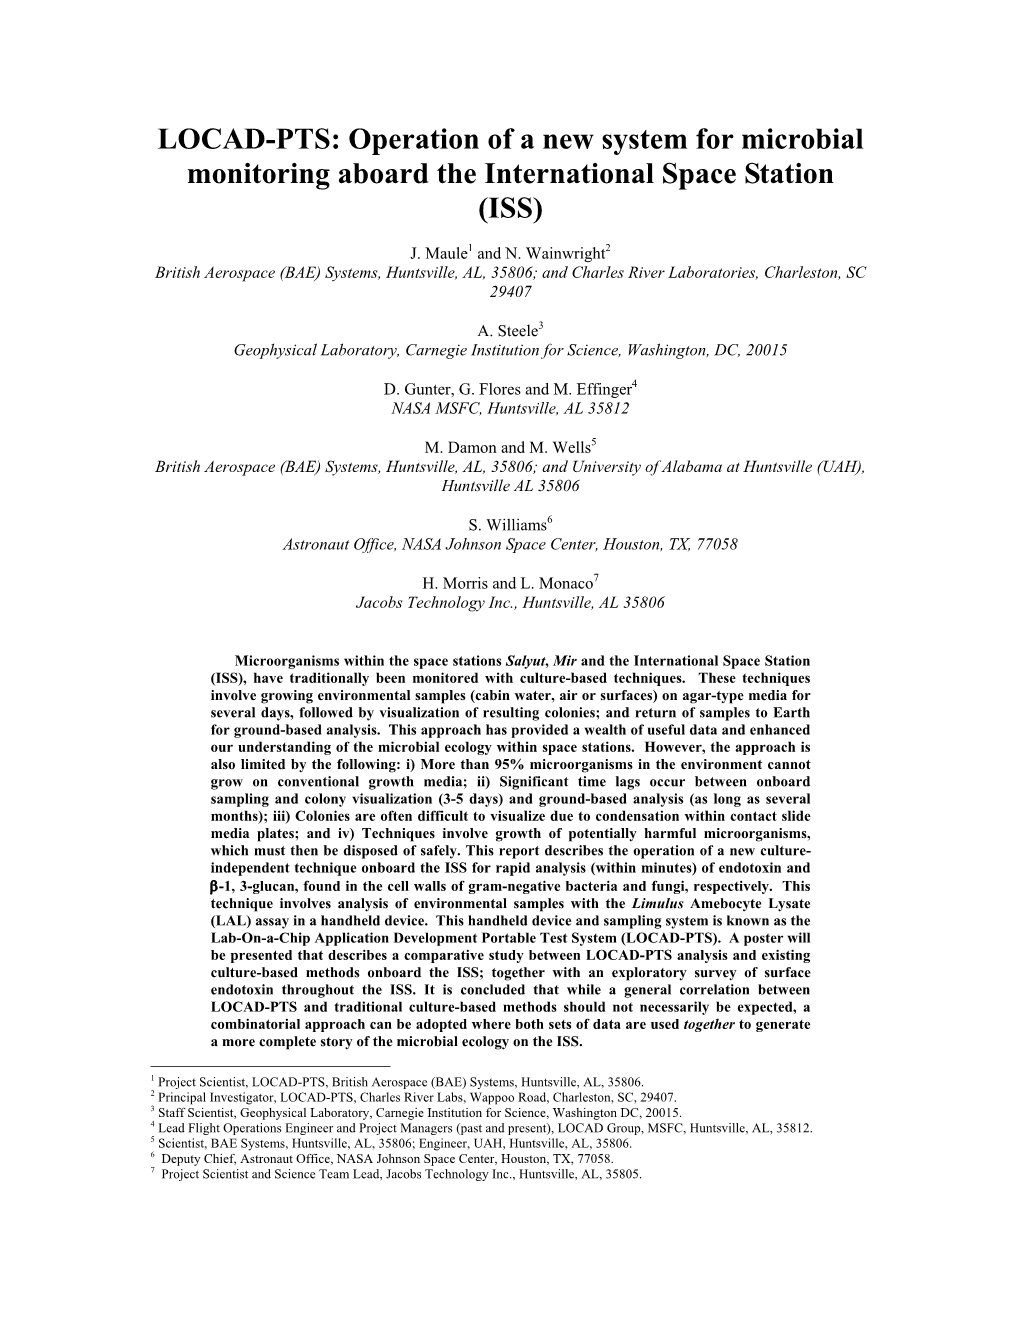 LOCAD-PTS: Operation of a New System for Microbial Monitoring Aboard the International Space Station (ISS)